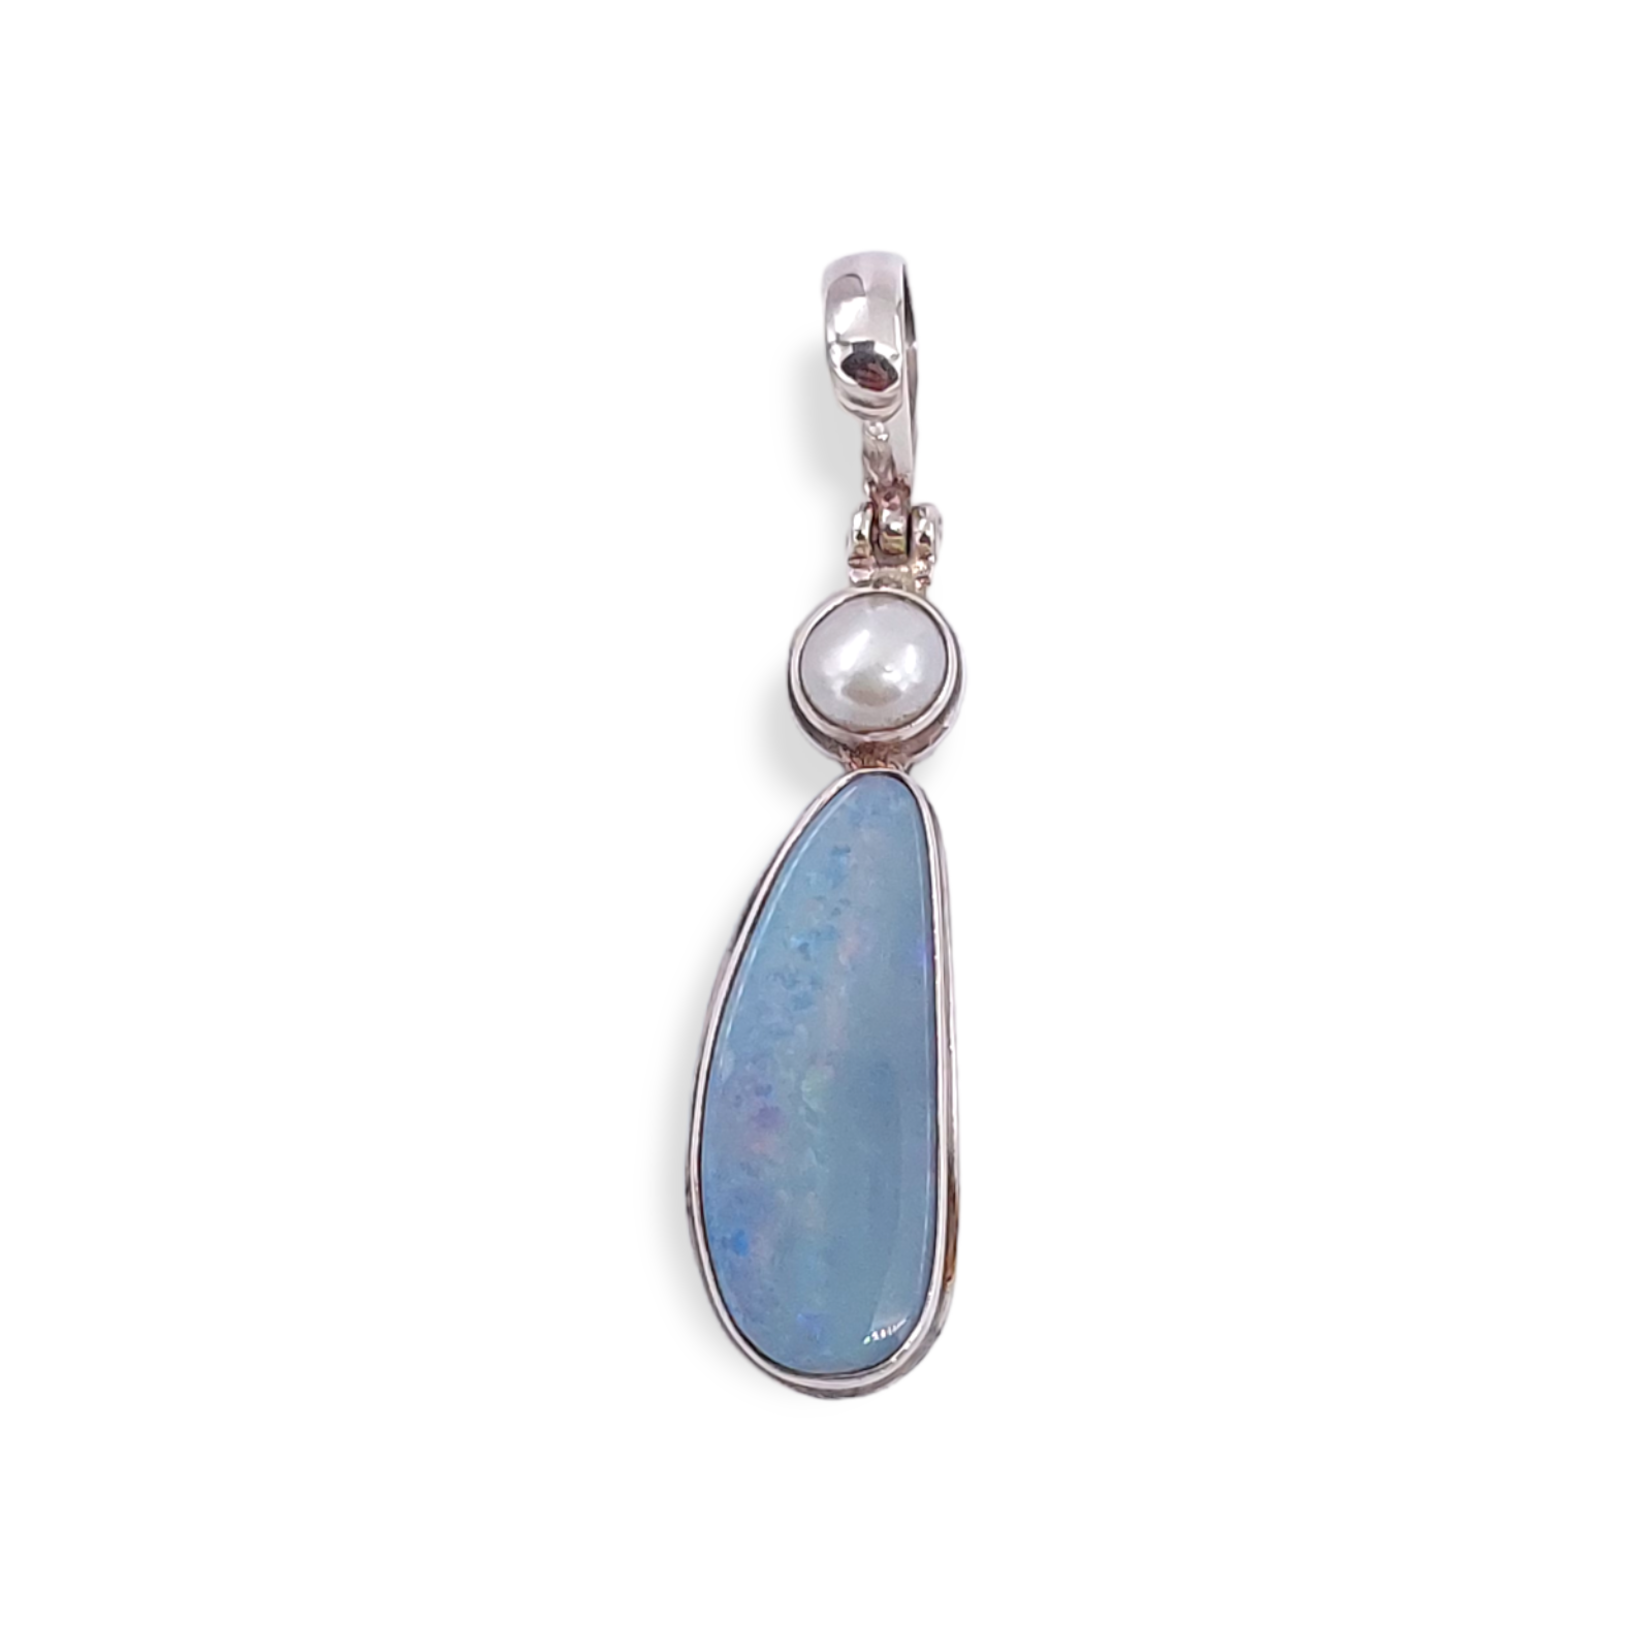 P458 Sterling Silver Opal and Pearl Pendant